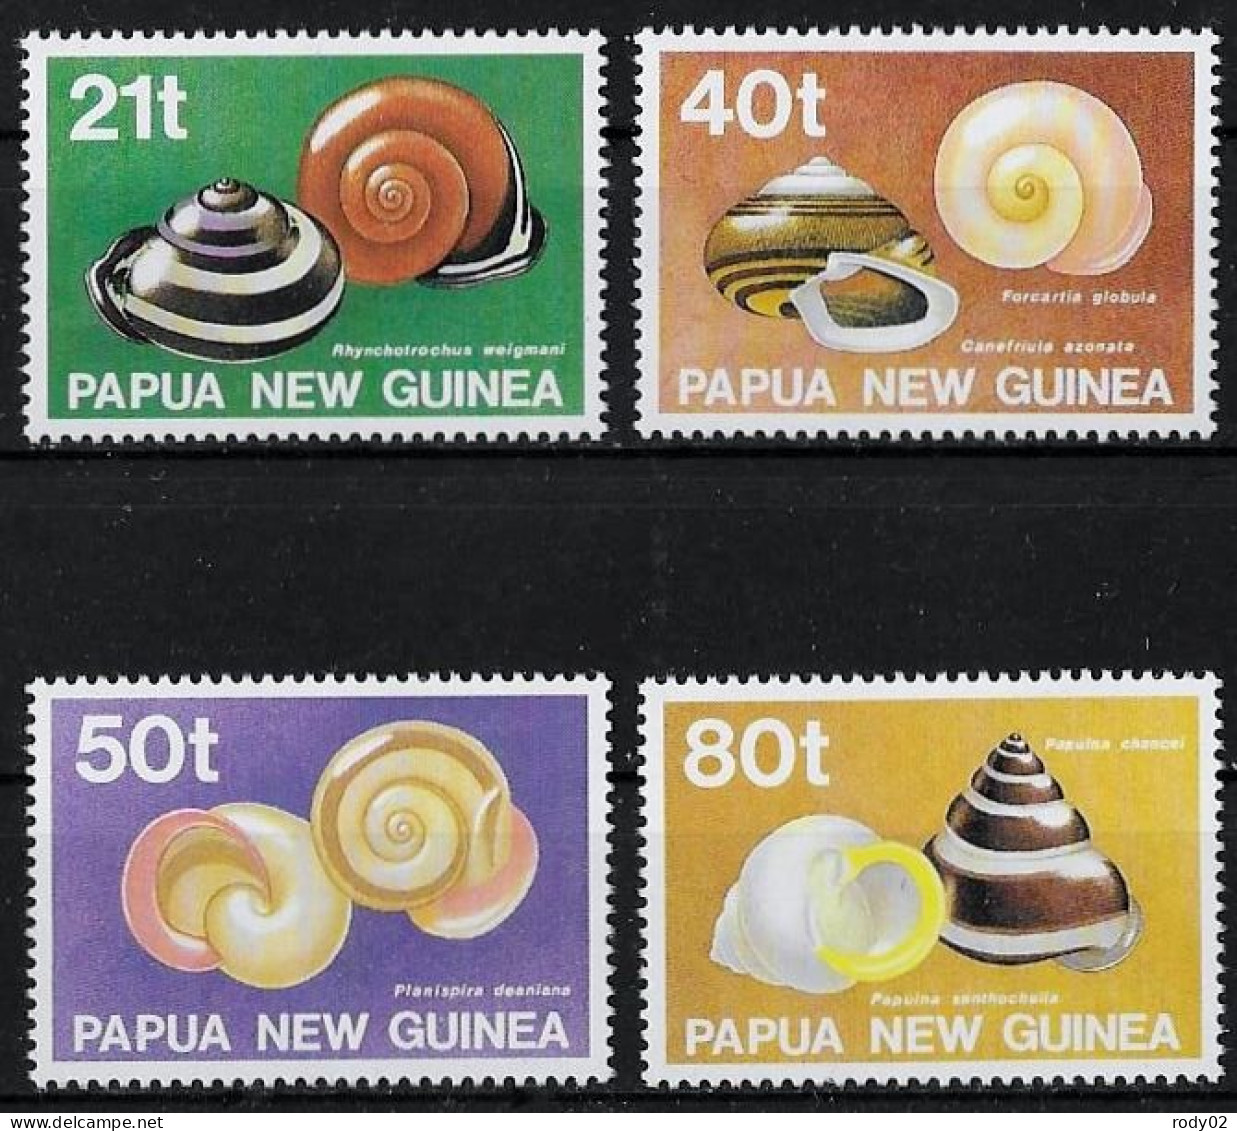 PAPOUASIE NOUVELLE-GUINEE - COQUILLAGES - N° 626 A 629 - NEUF** MNH - Conchas